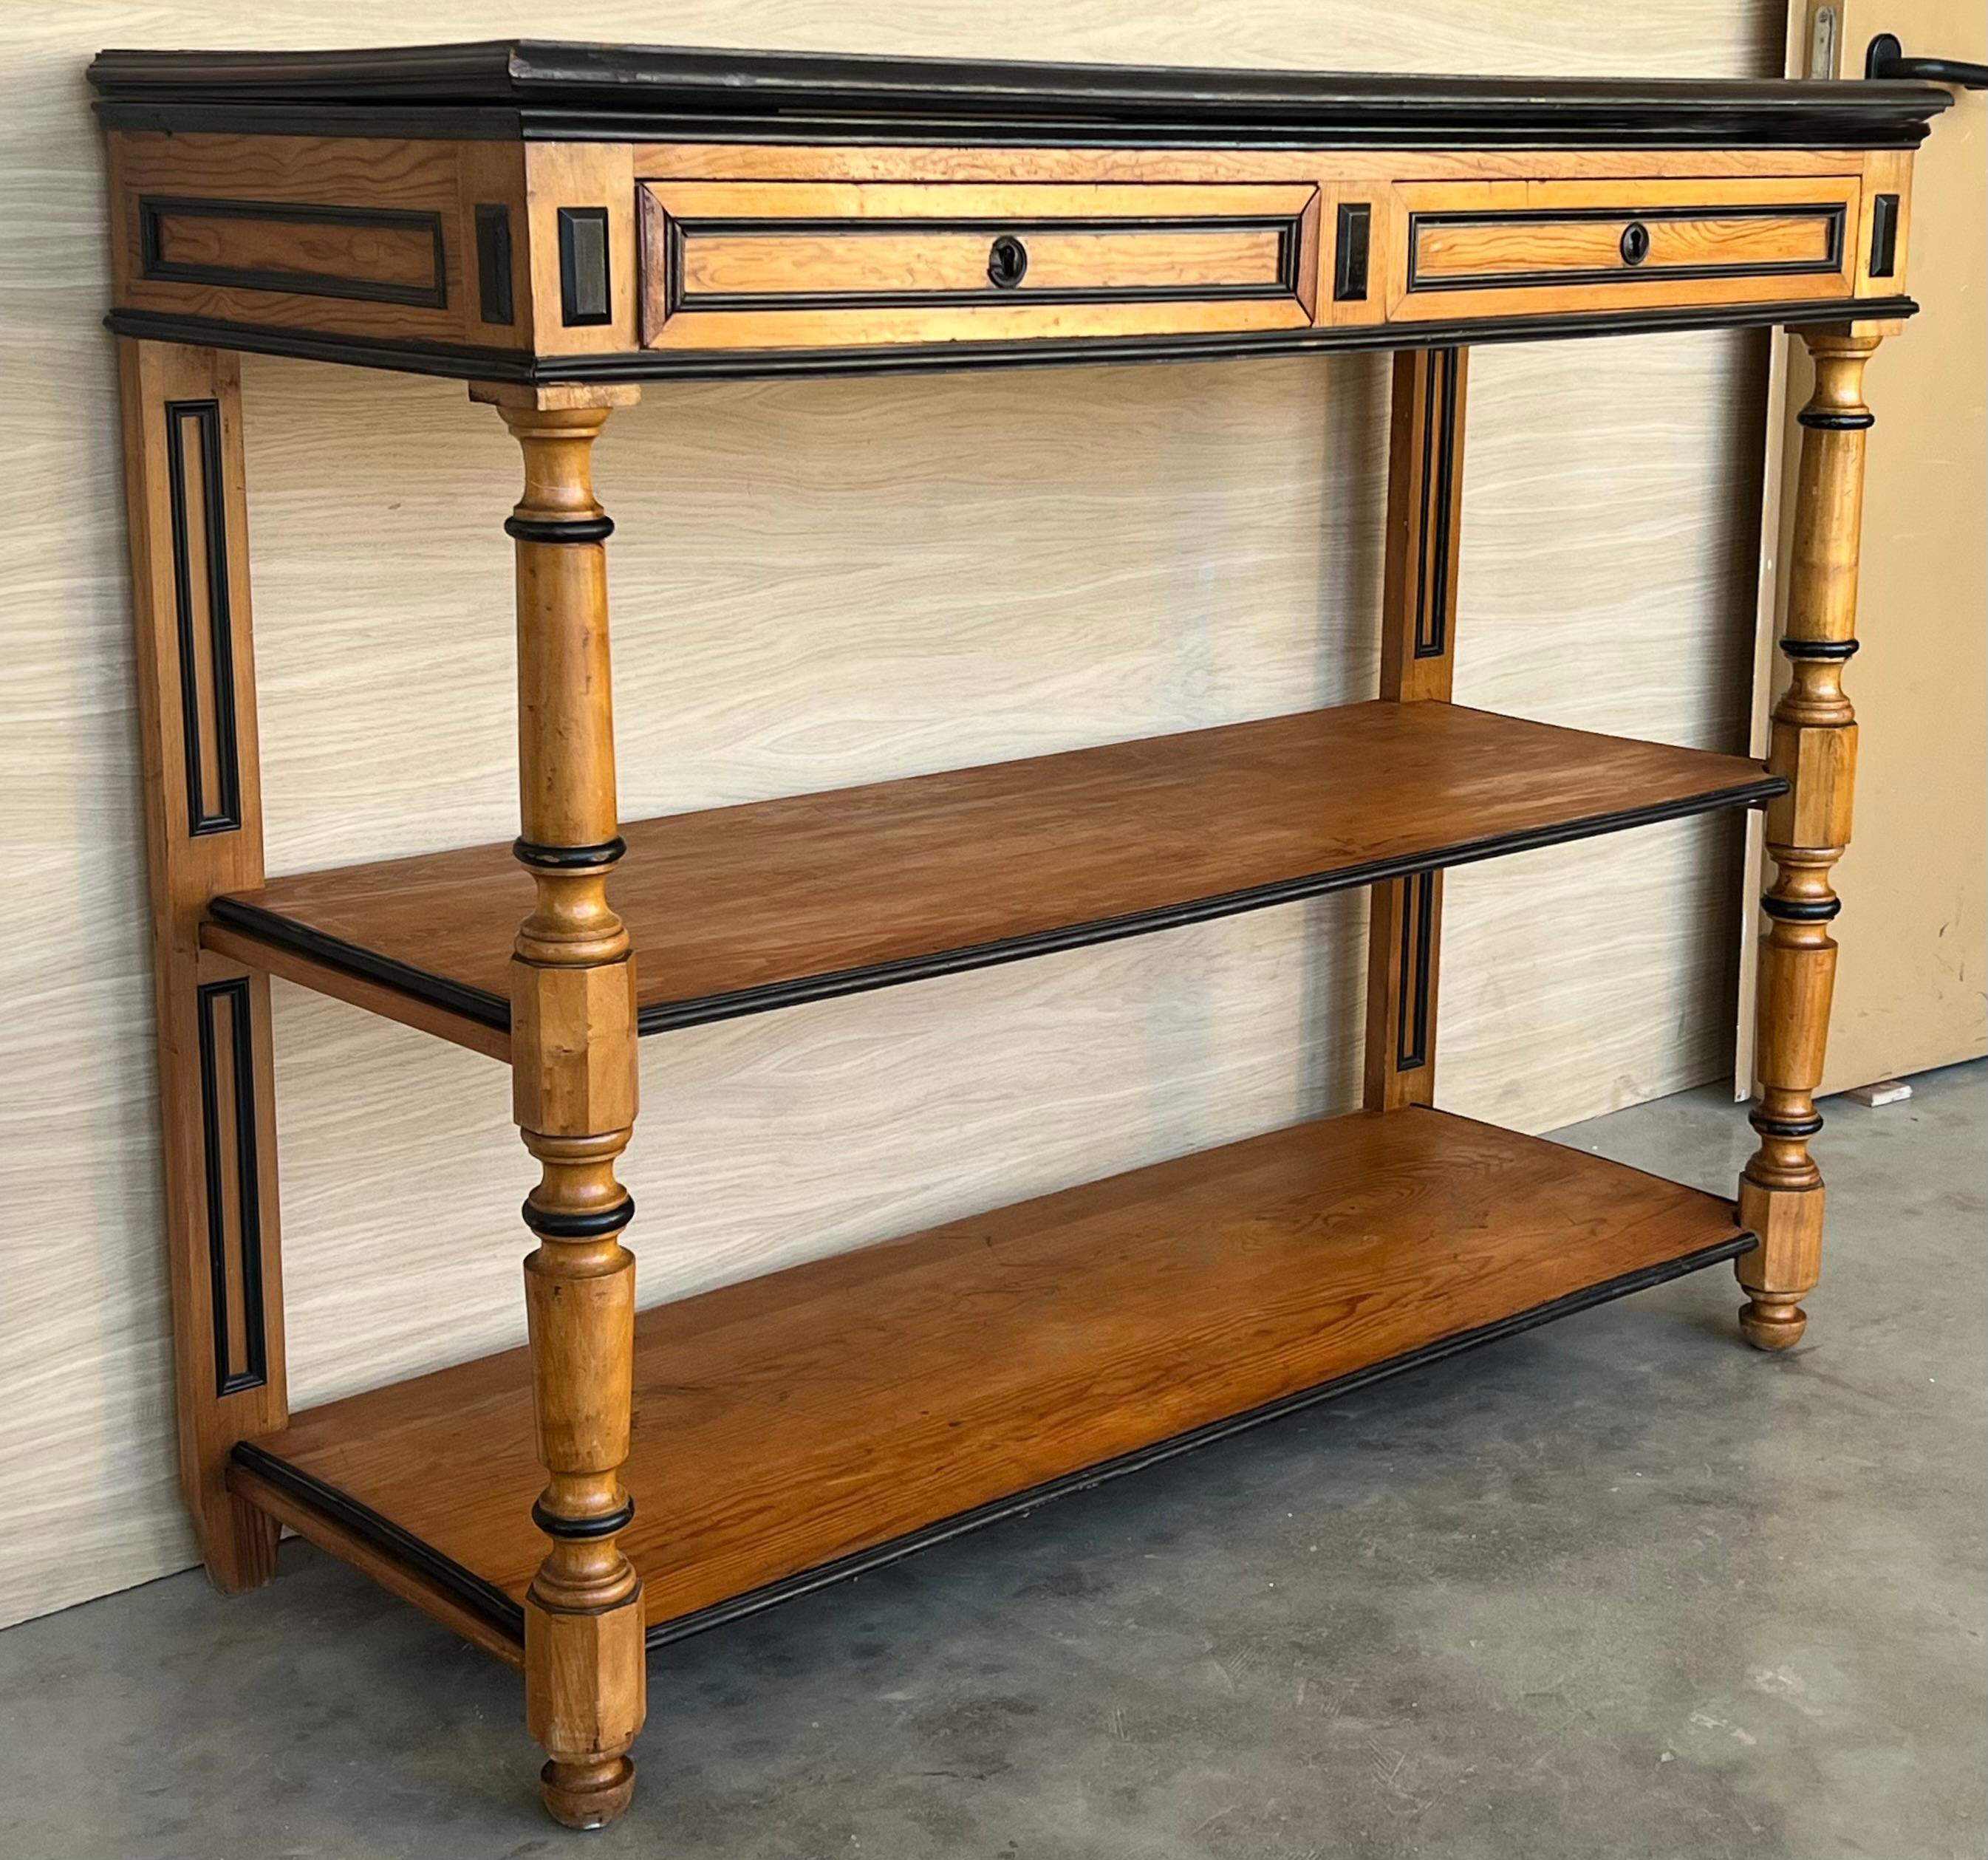 Early 20th C English Lemontree Three Tier Server or Buffet with Drawers For Sale 1